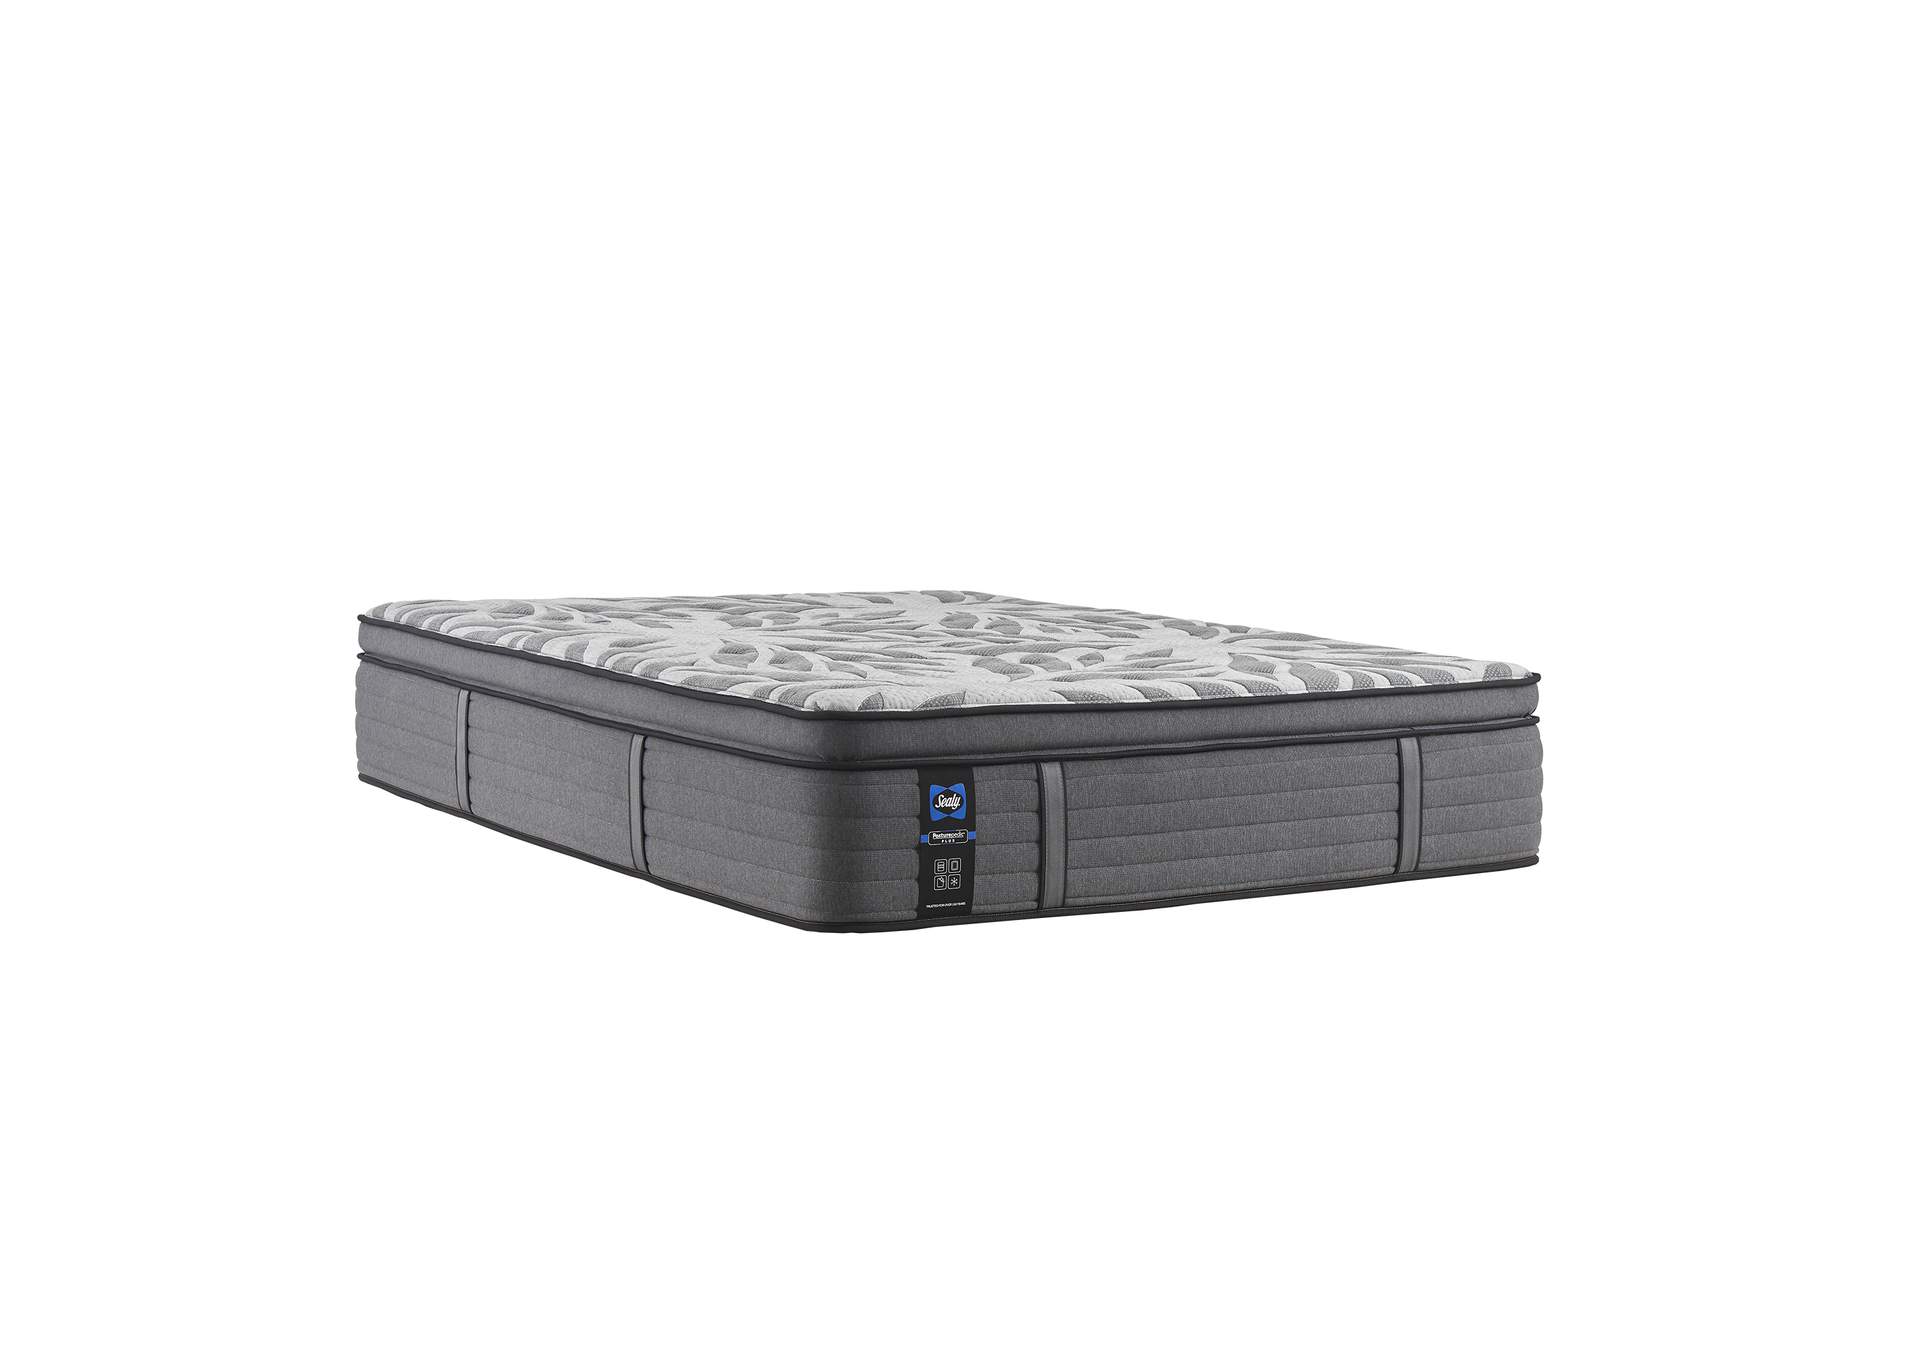 Satisfied II Soft Pillow Top Cal King Mattress,Sealy